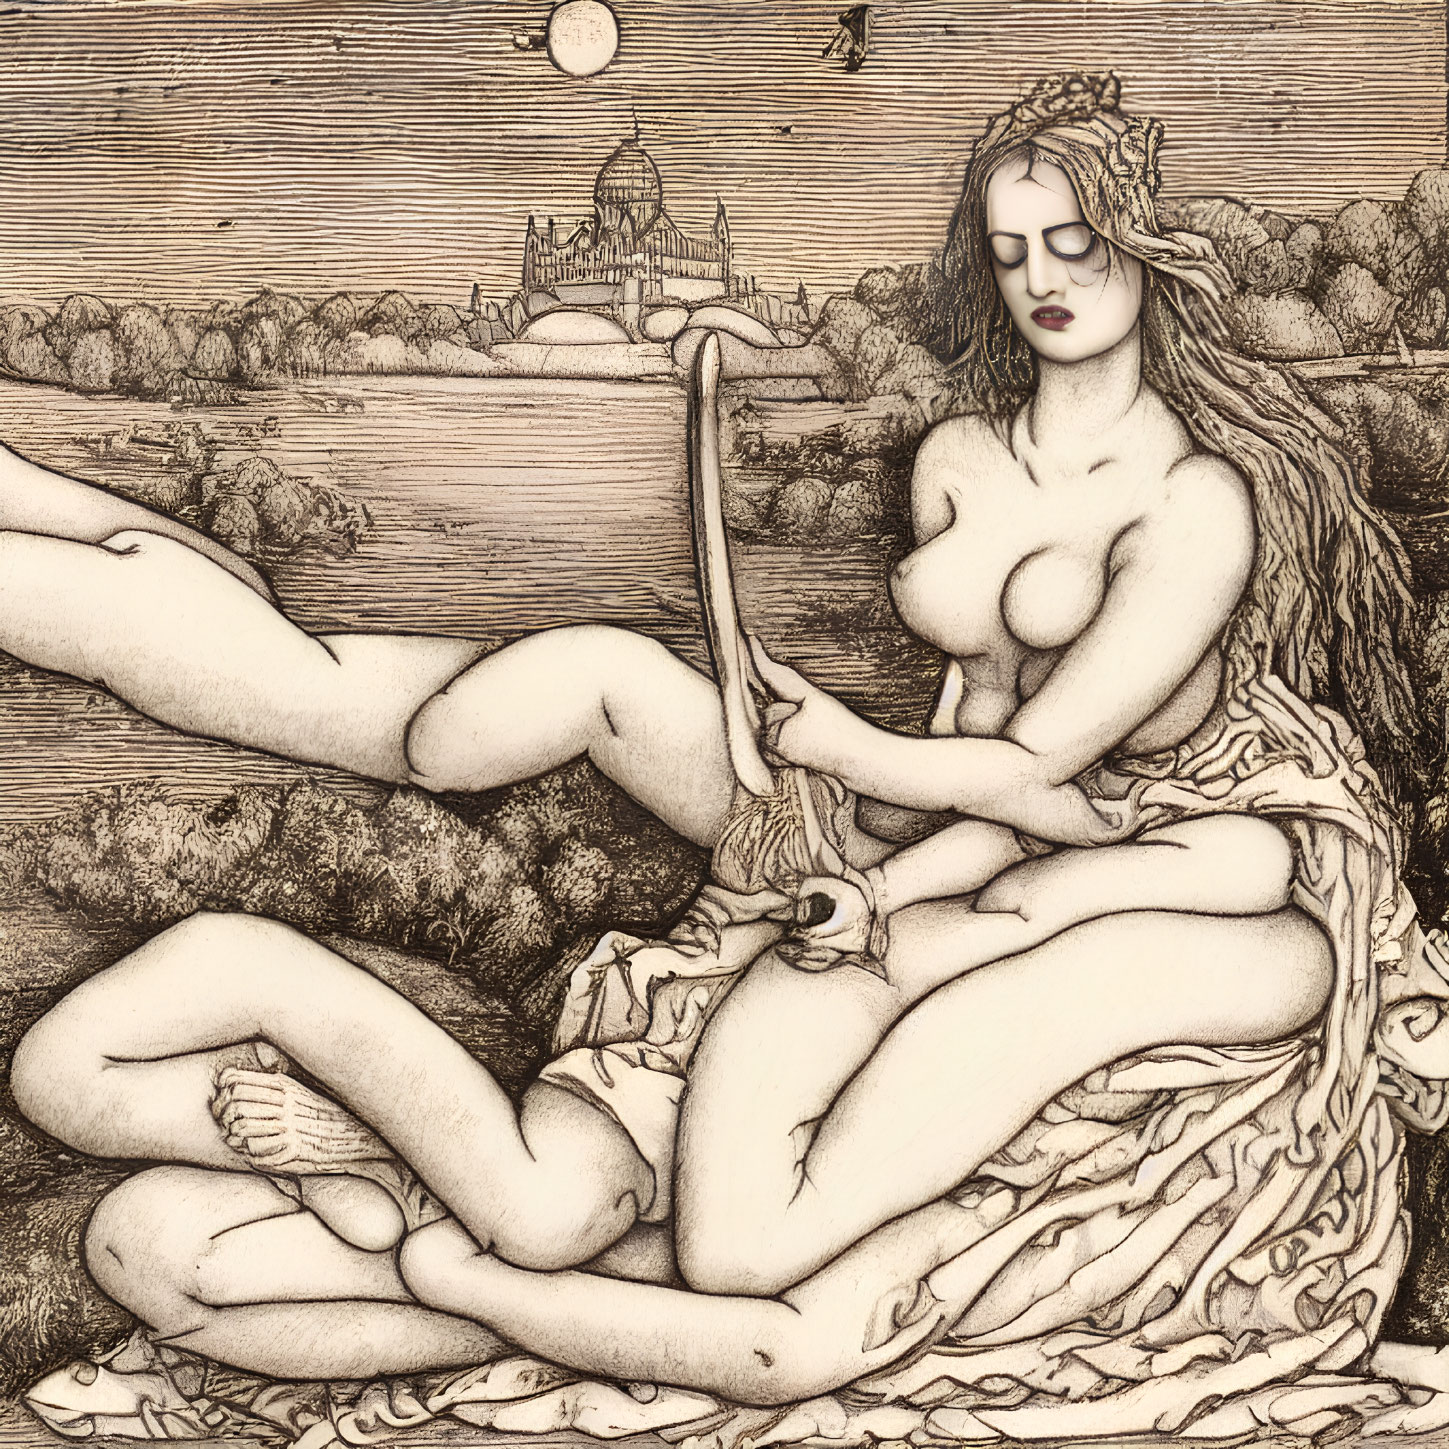 Sketch of reclining nude female figure with sickle in nest-like setting.